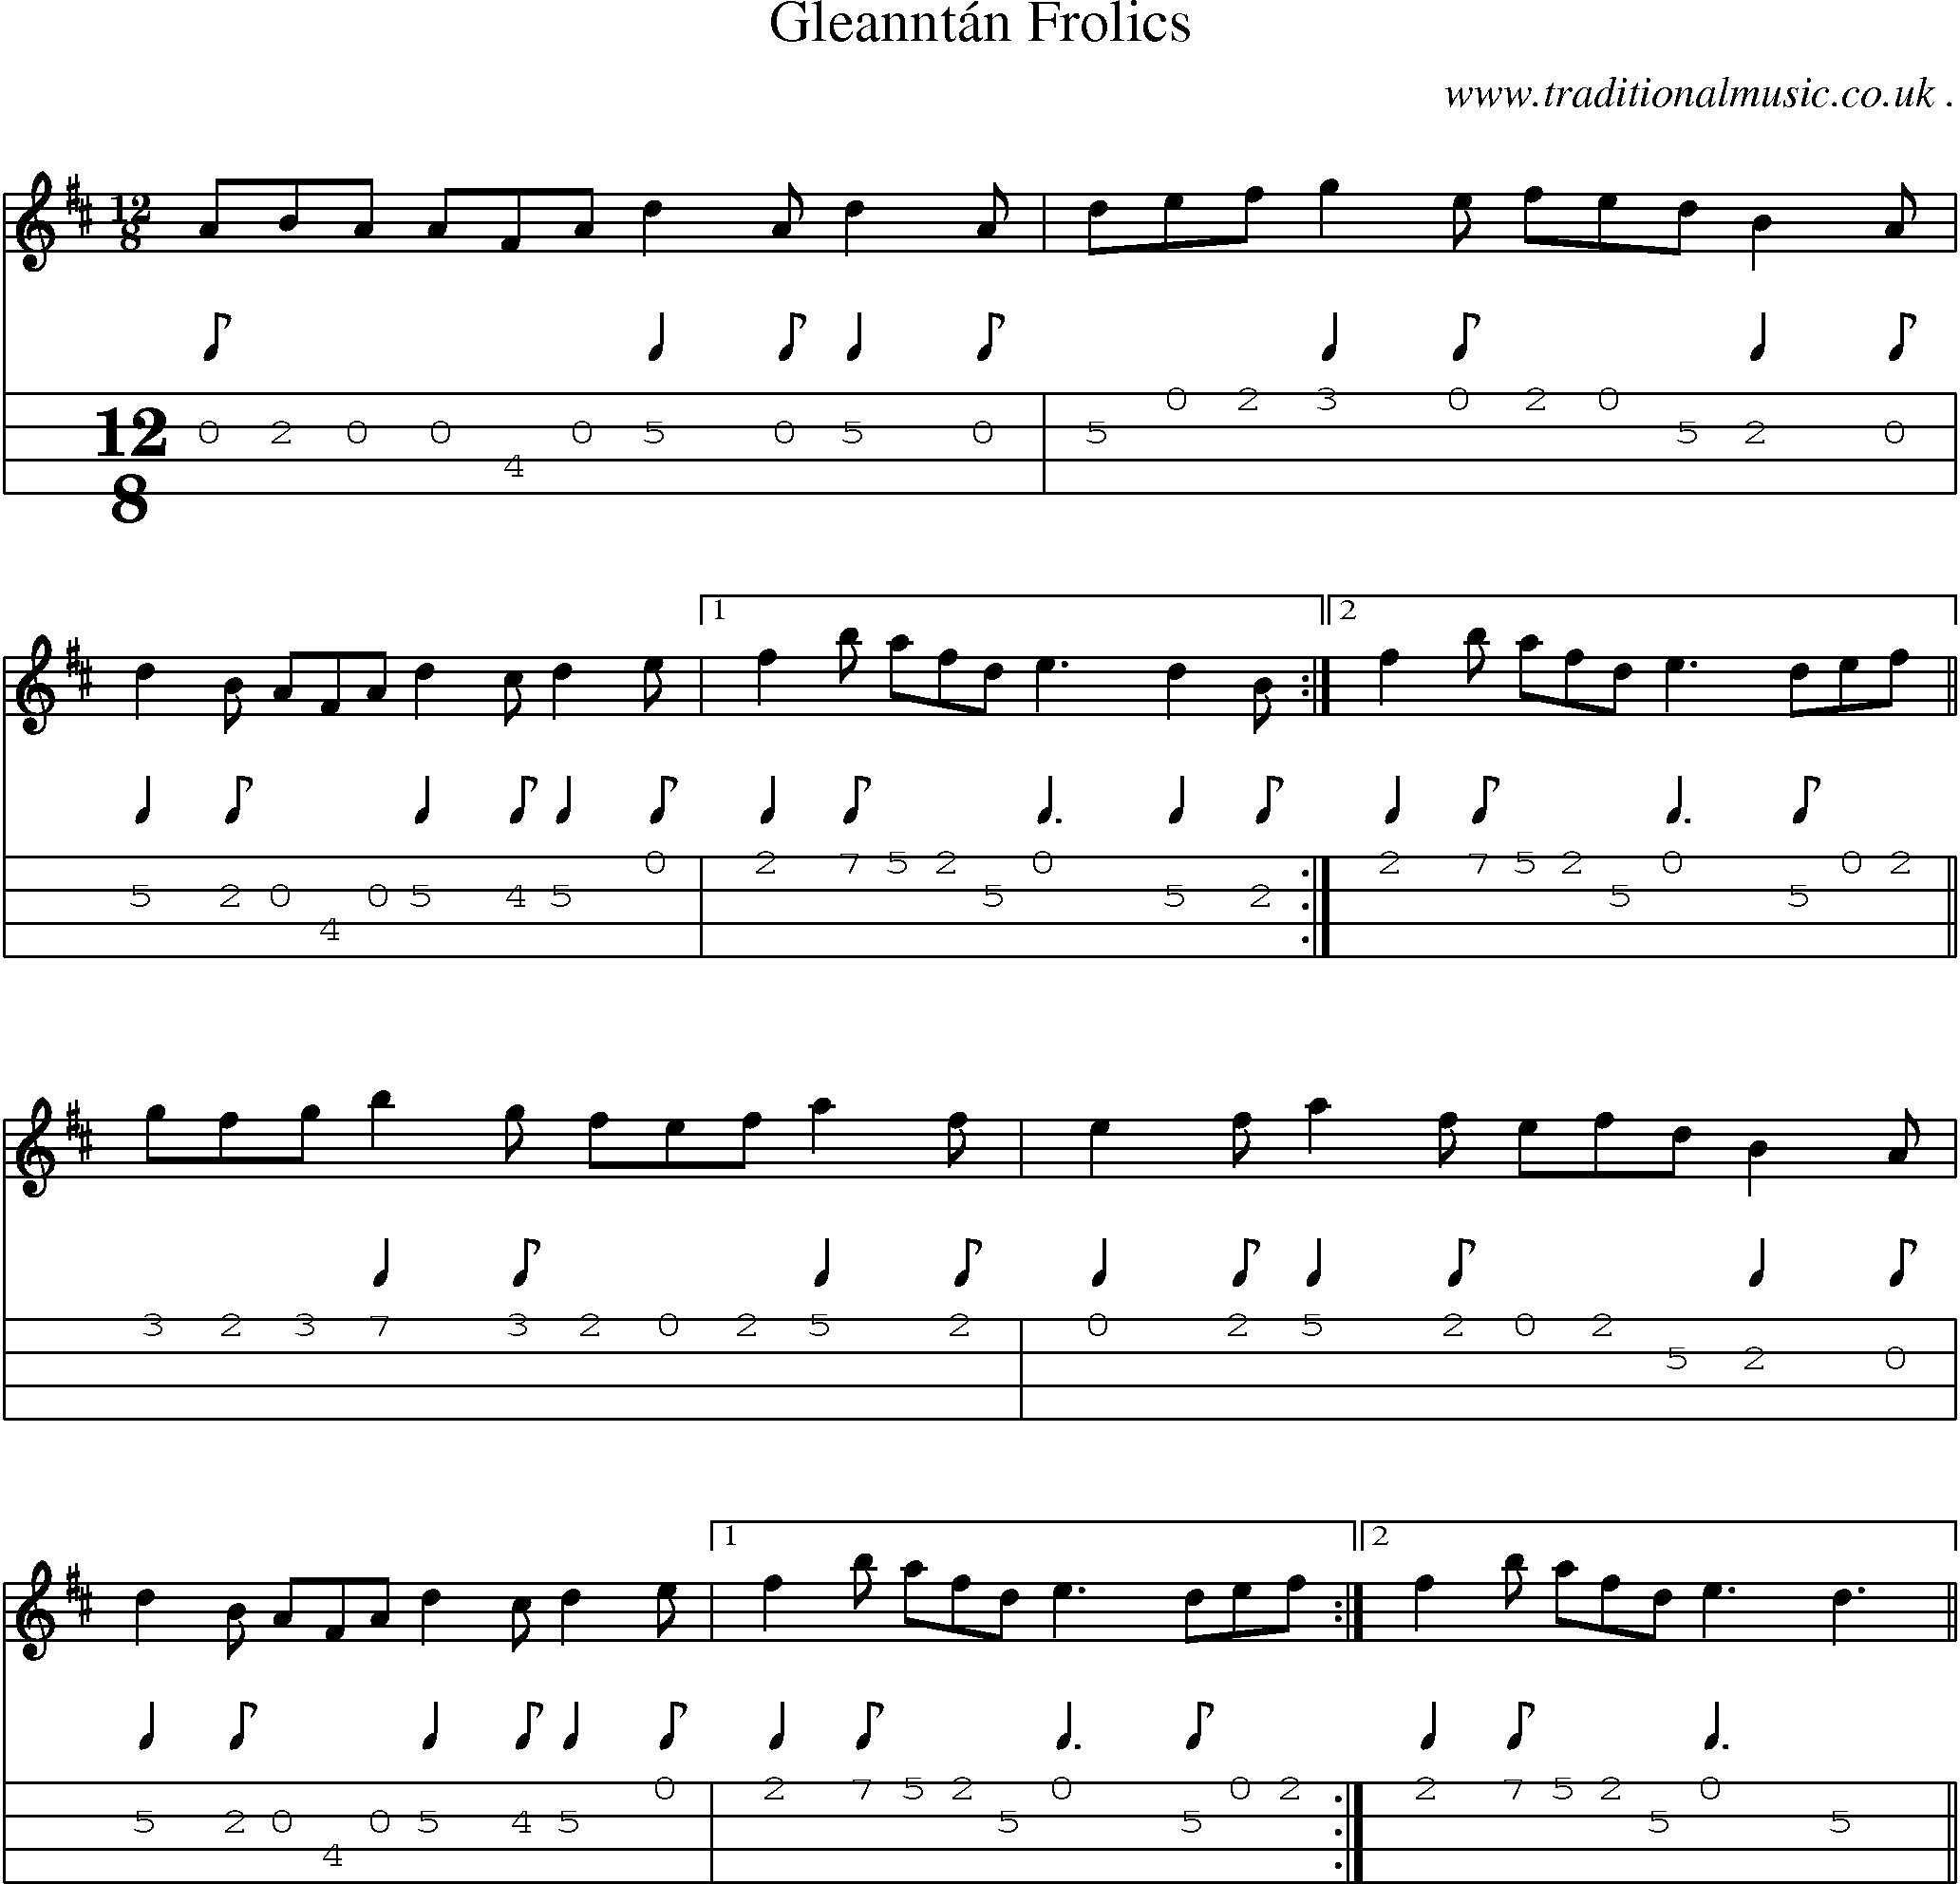 Sheet-music  score, Chords and Mandolin Tabs for Gleanntan Frolics